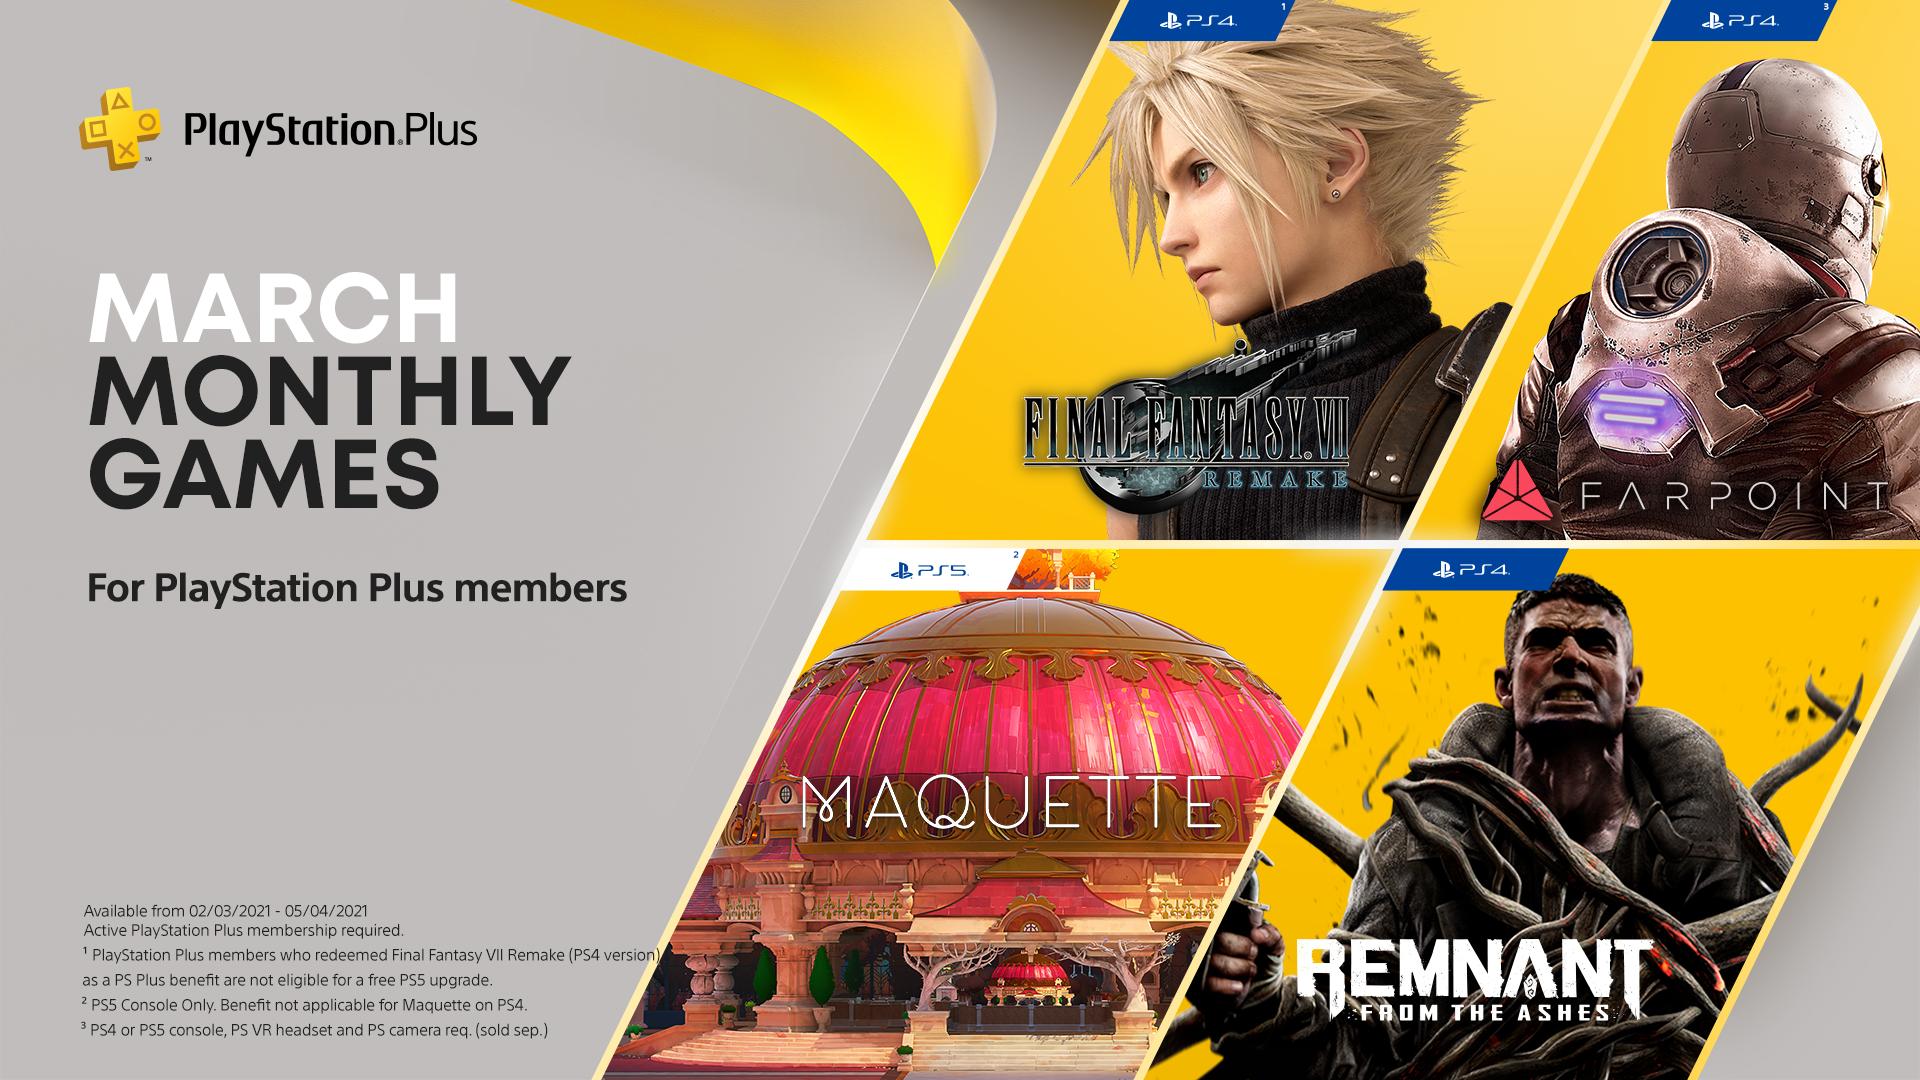 PlayStation on Twitter: "Final Fantasy VII Maquette, Remnant: From Ashes and Farpoint are your PlayStation Plus games for March: https://t.co/tQFJNoURI9 / Twitter